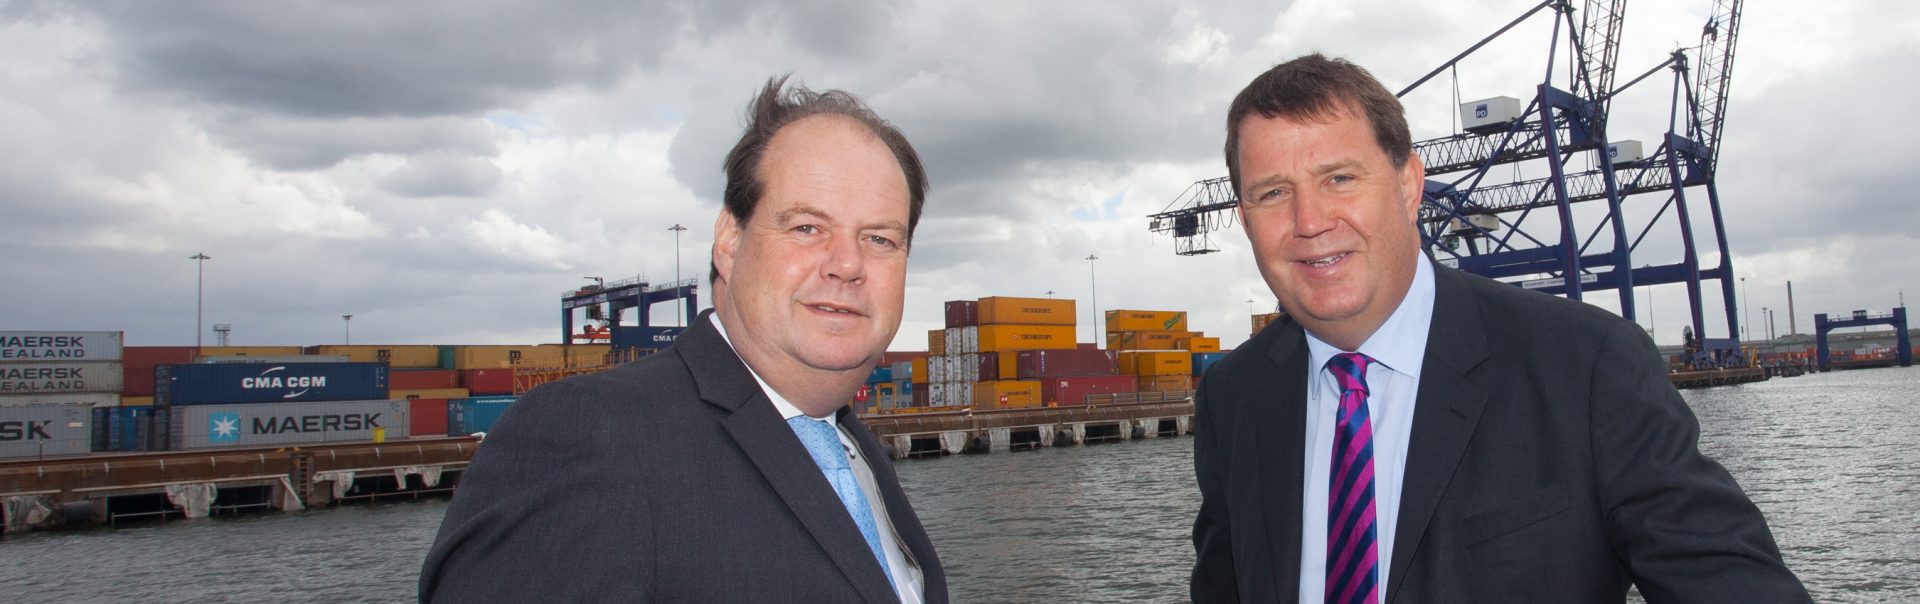 Maritime sector vital to UK economy, Under Secretary of State for Transport says during Teesport visit